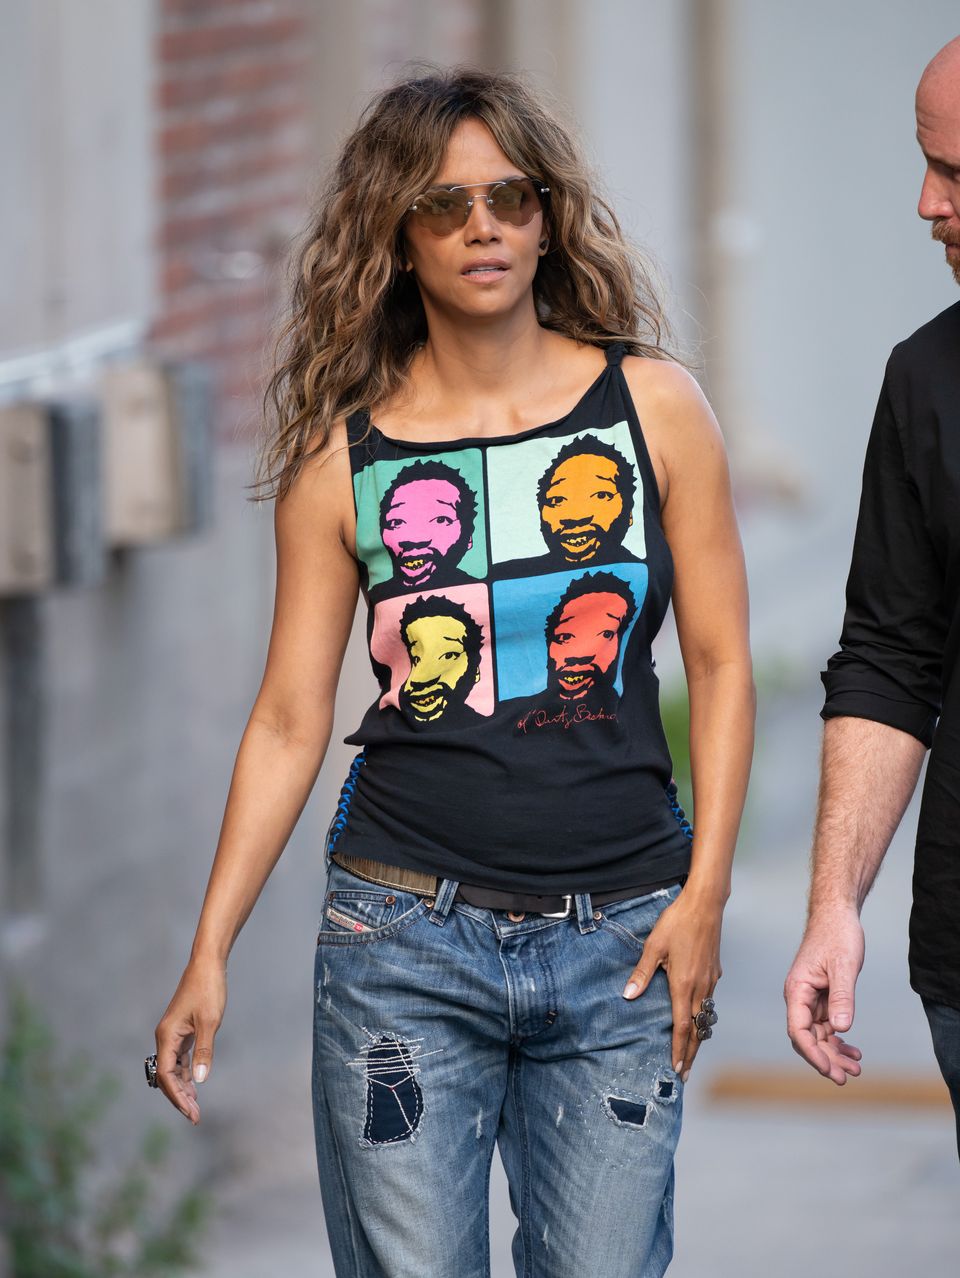 Halle Berry is seen at 'Jimmy Kimmel Live' on May 22, 2019 in Los Angeles, California. | Source: Getty Images